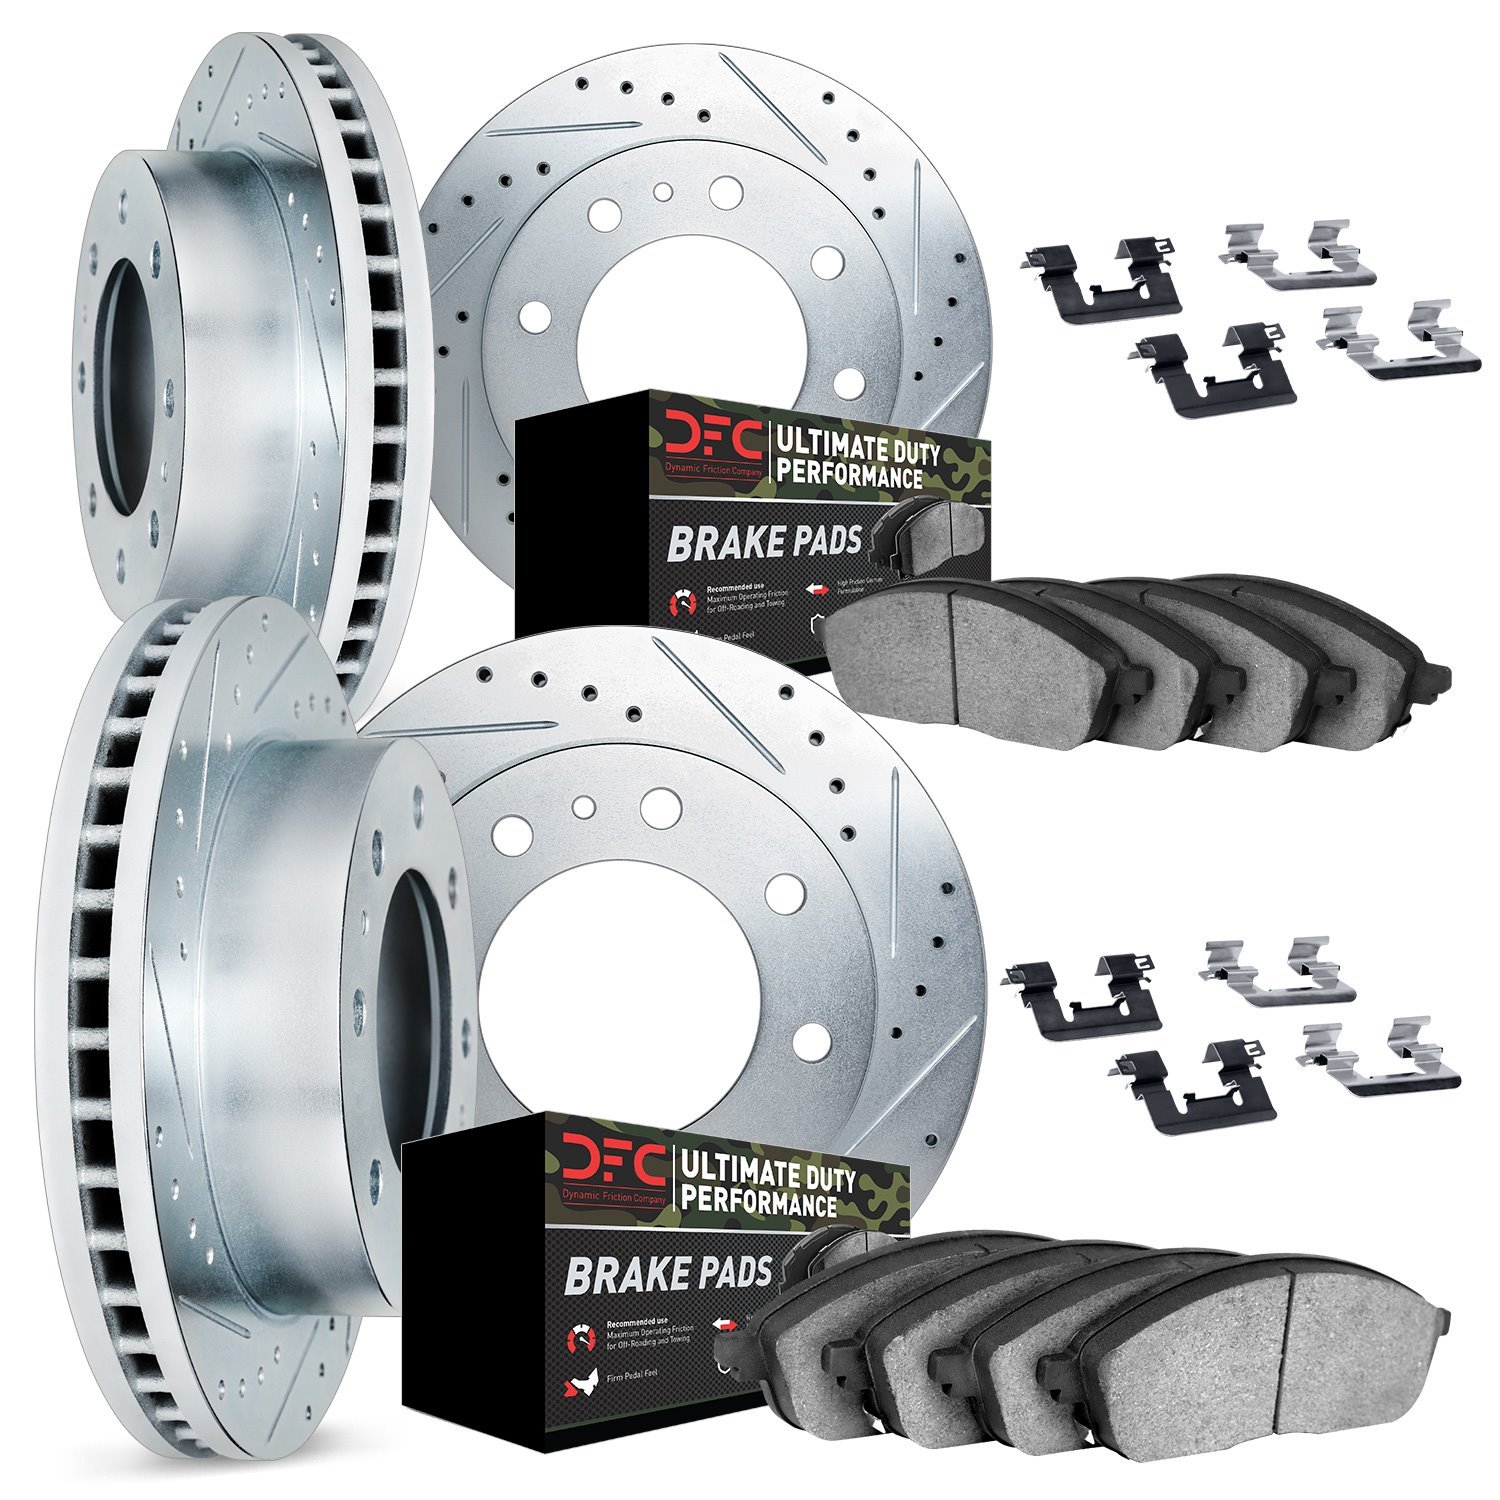 7414-54052 Drilled/Slotted Brake Rotors with Ultimate-Duty Brake Pads Kit & Hardware [Silver], Fits Select Ford/Lincoln/Mercury/